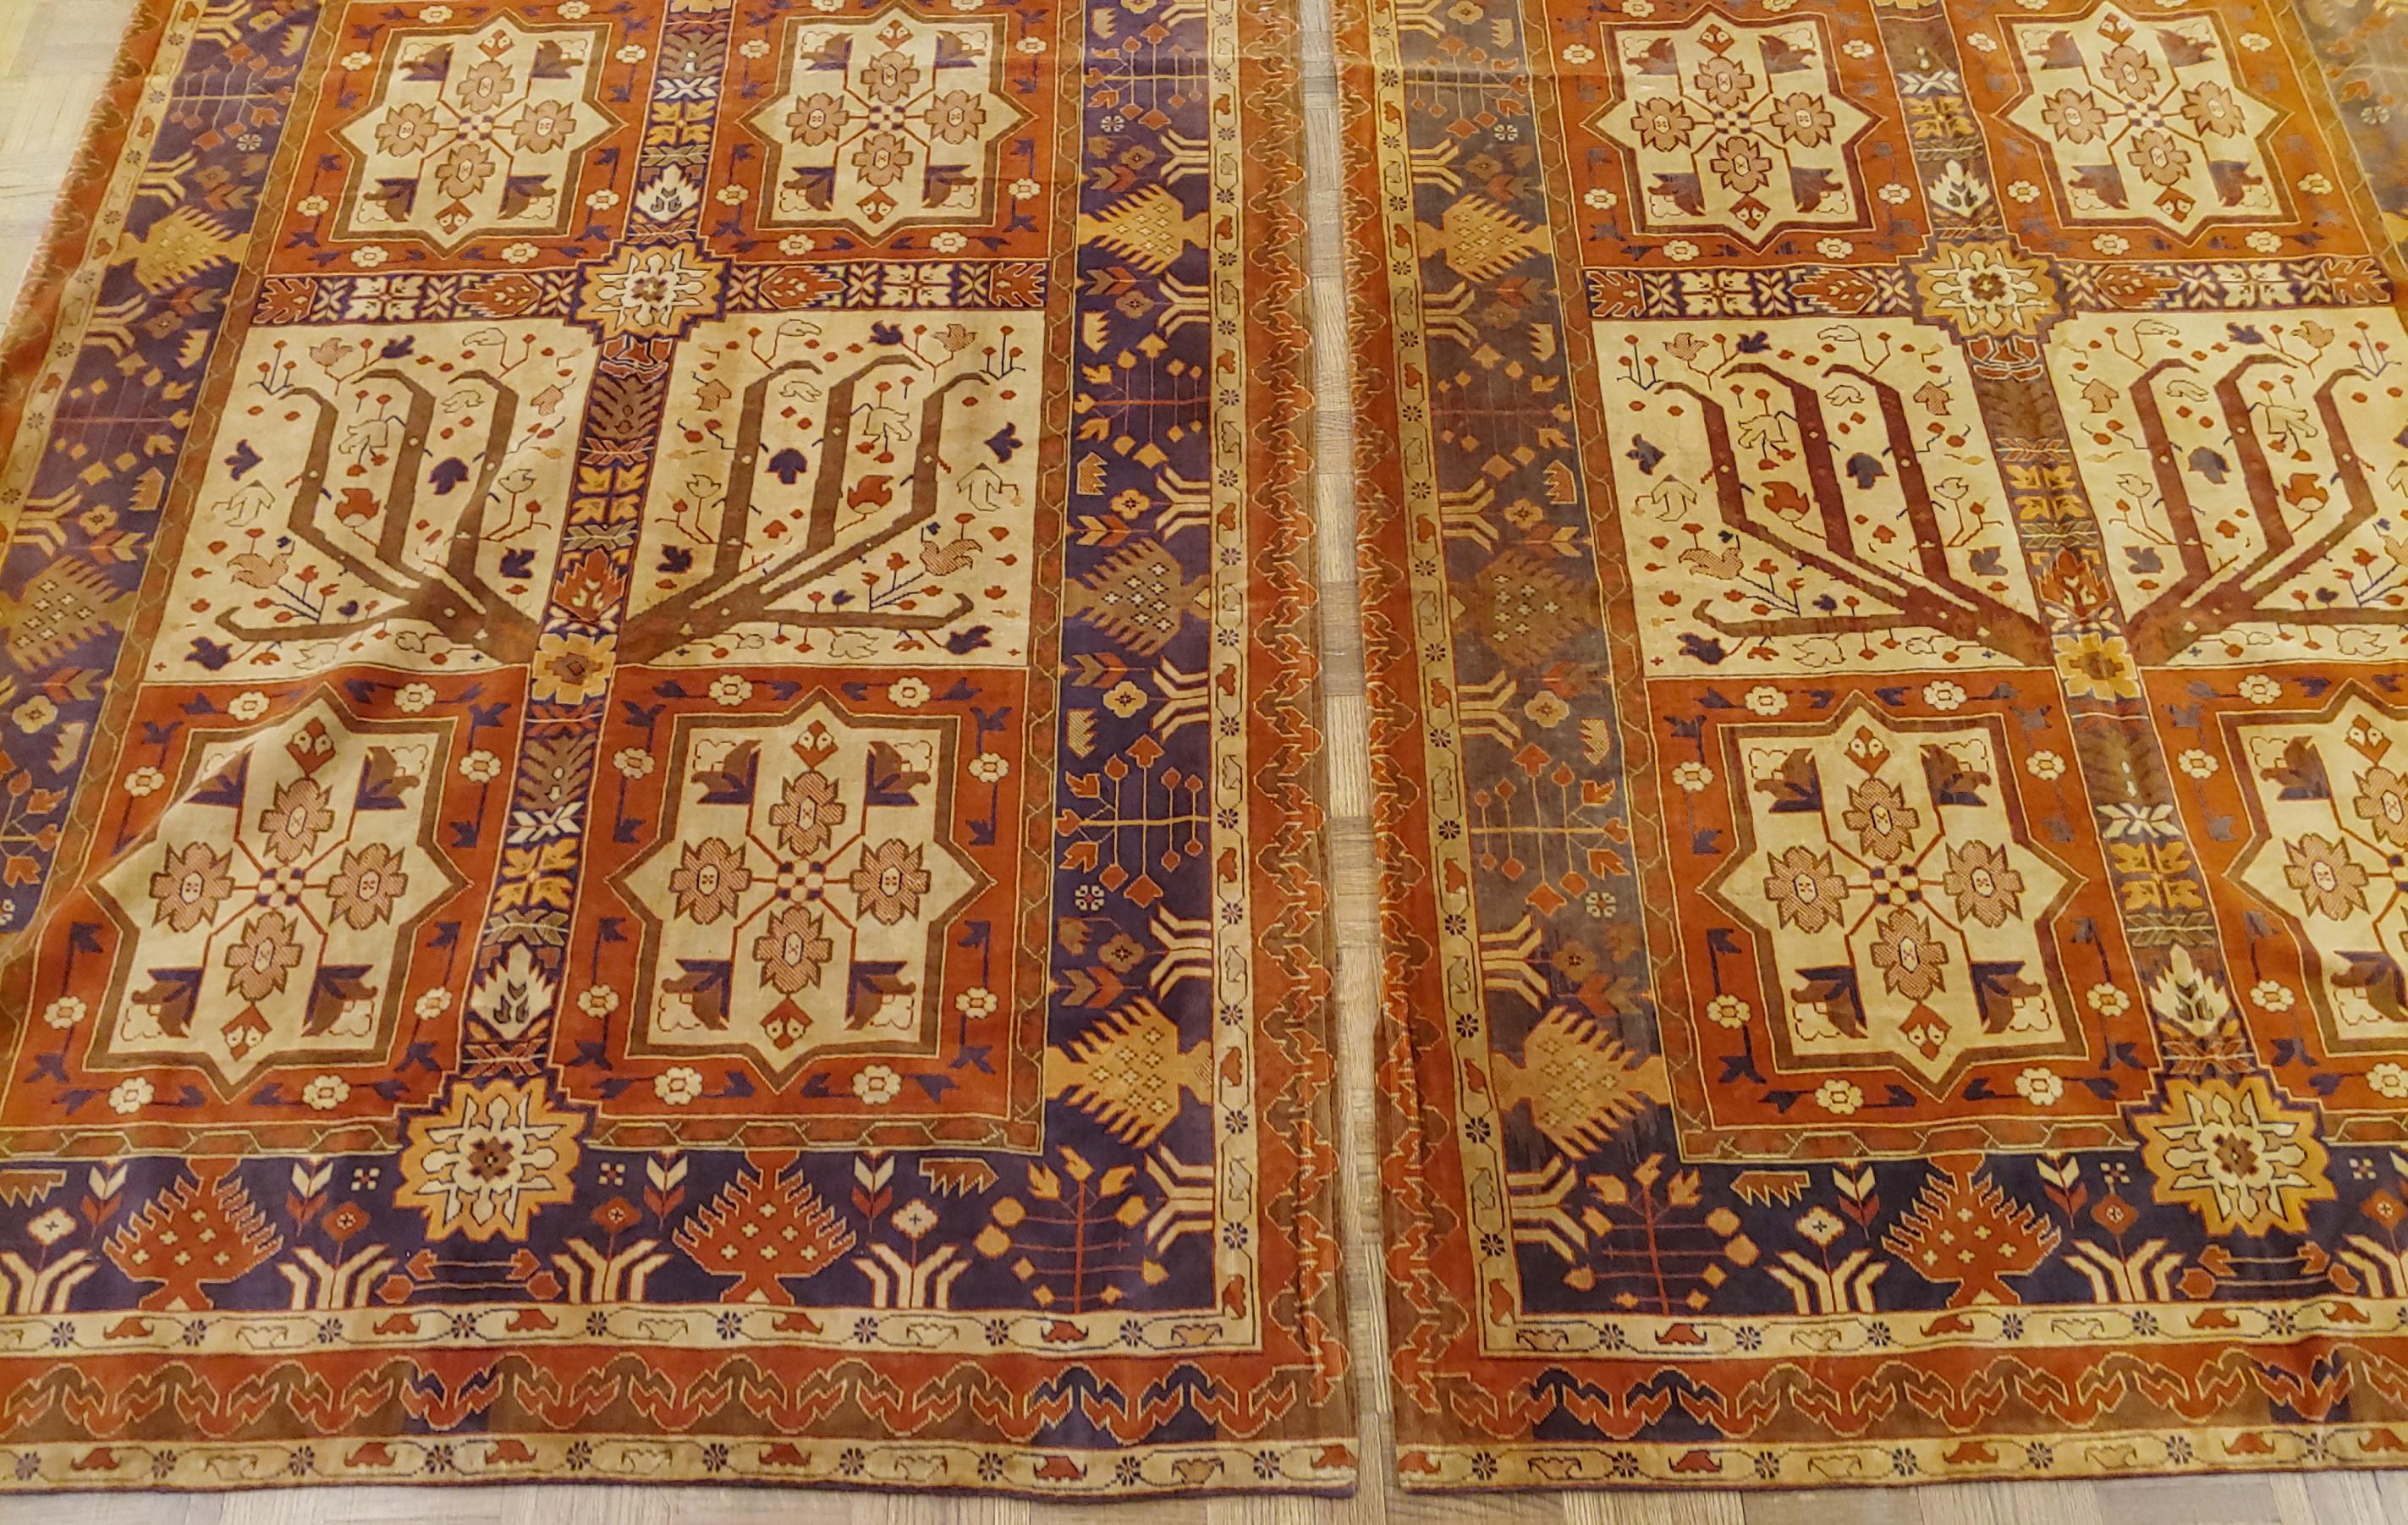 This is a pair of English portiere velvet tapestries. They have a very unusual 'Turkish Work' design, reminiscent to Arts & Crafts or William Morris designs. They are velvet and have been folded over at one end and were apparently hung like that.